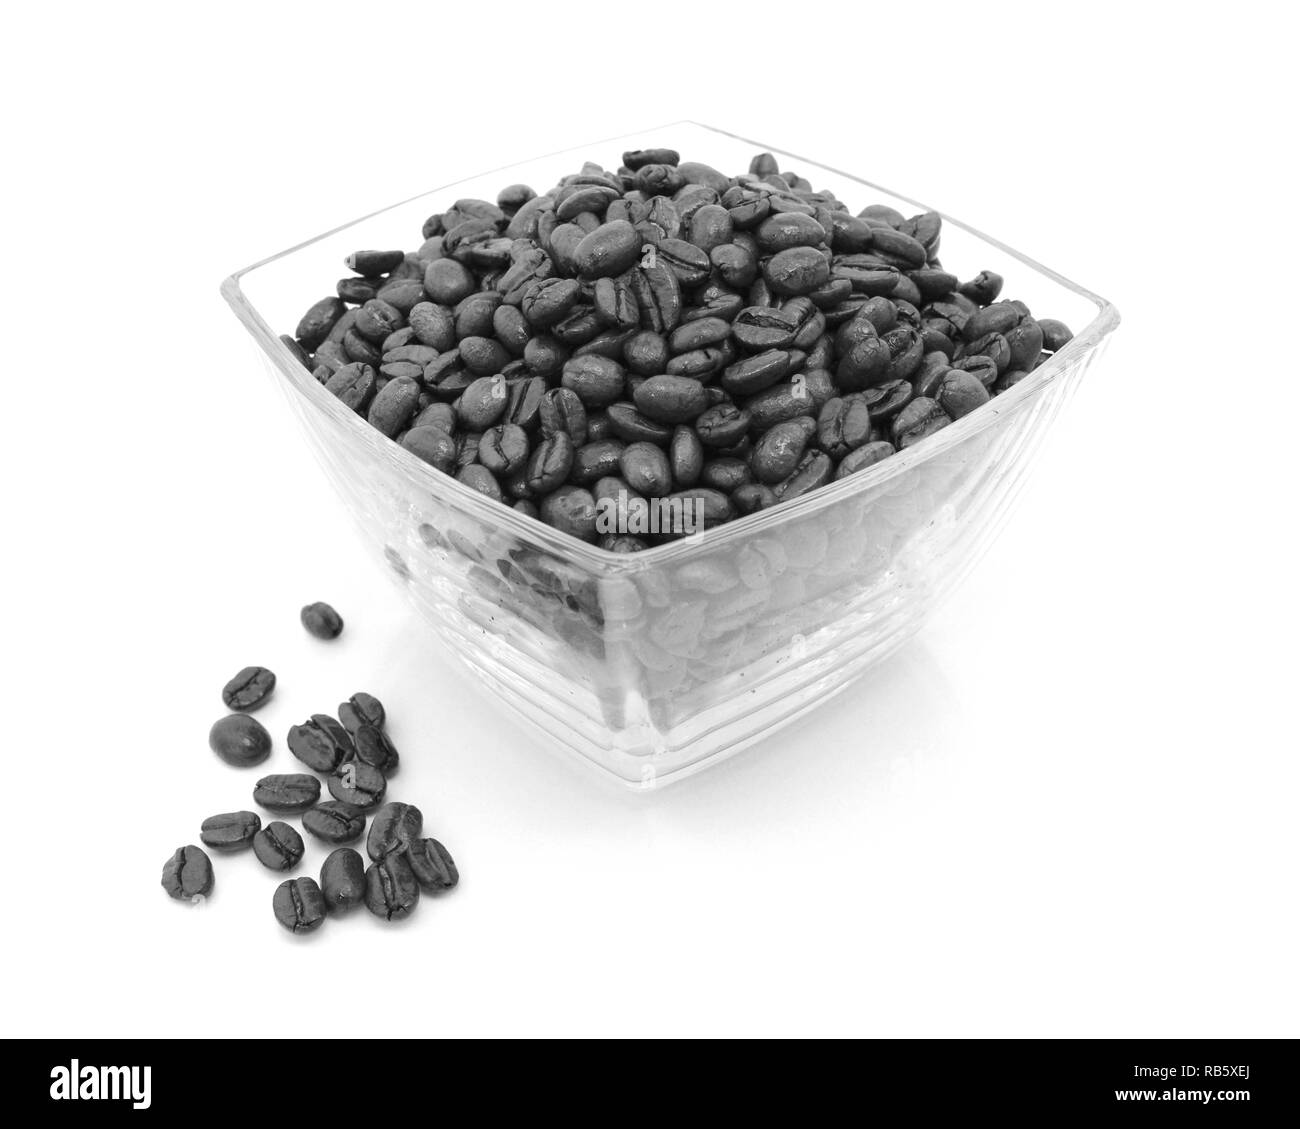 Glass dish filled with roasted coffee beans with some spilled beside on a white background - monochrome processing Stock Photo